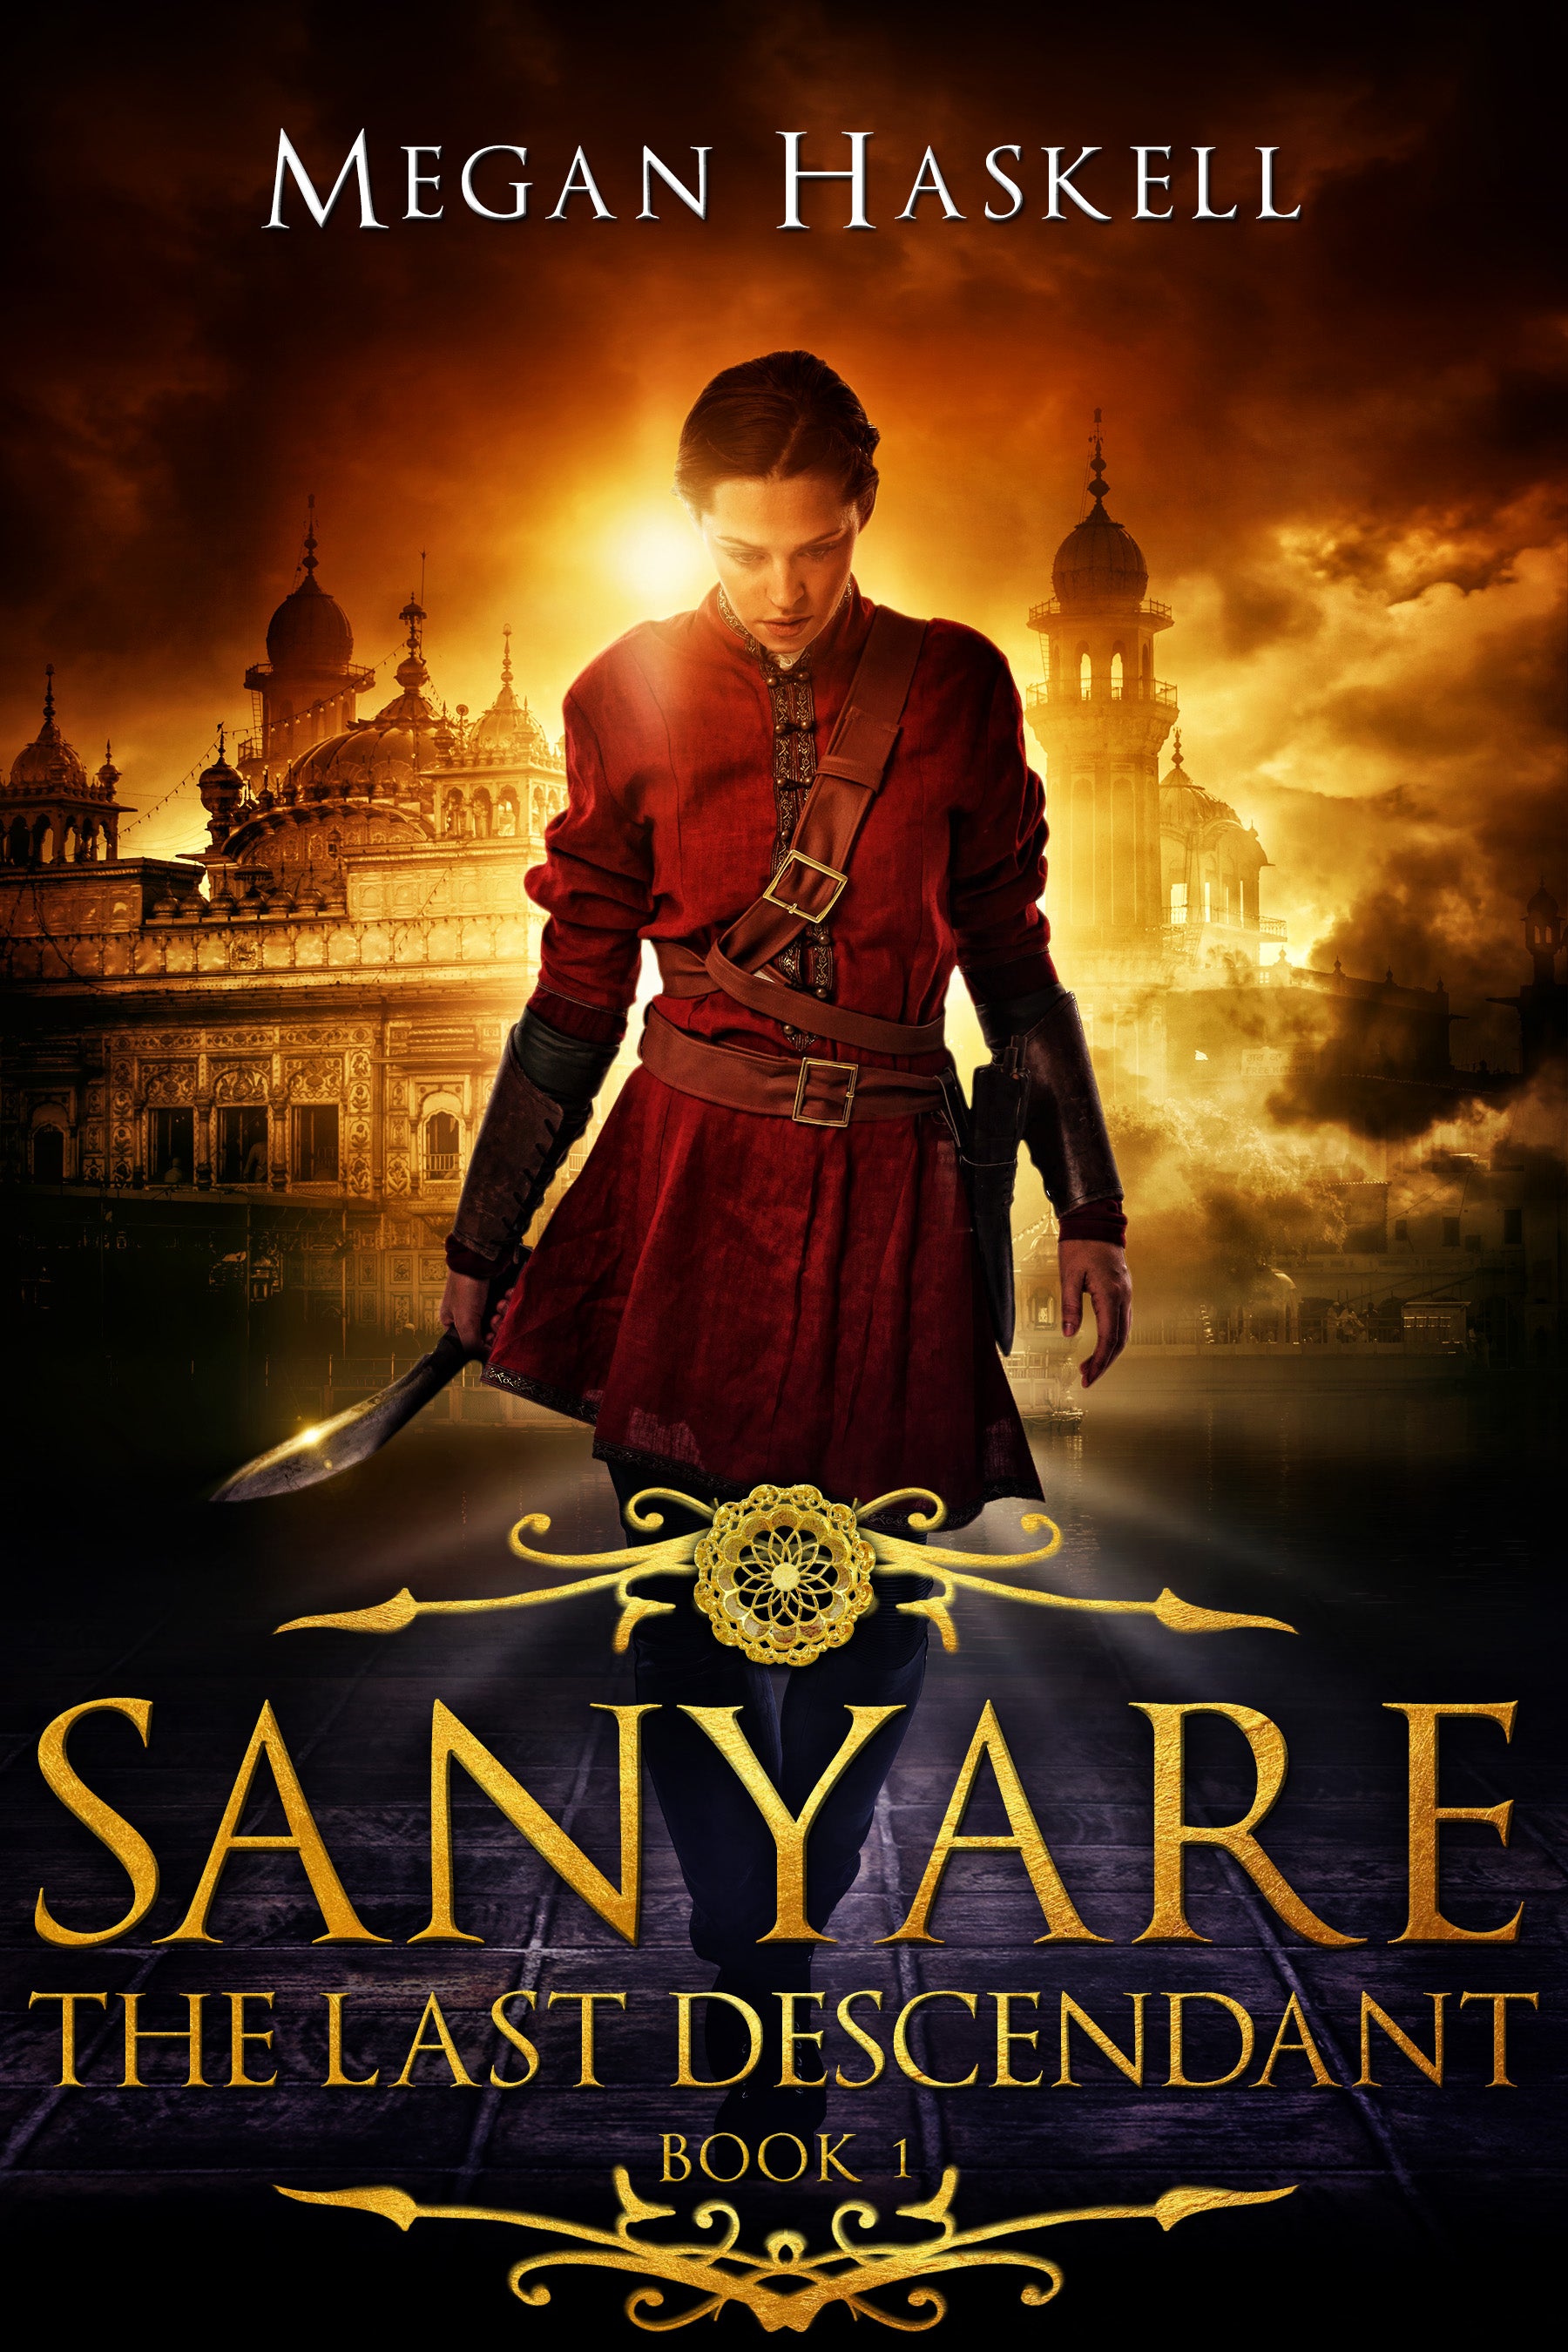 Book Review: Sanyare The Last Descendant by Megan Haskell